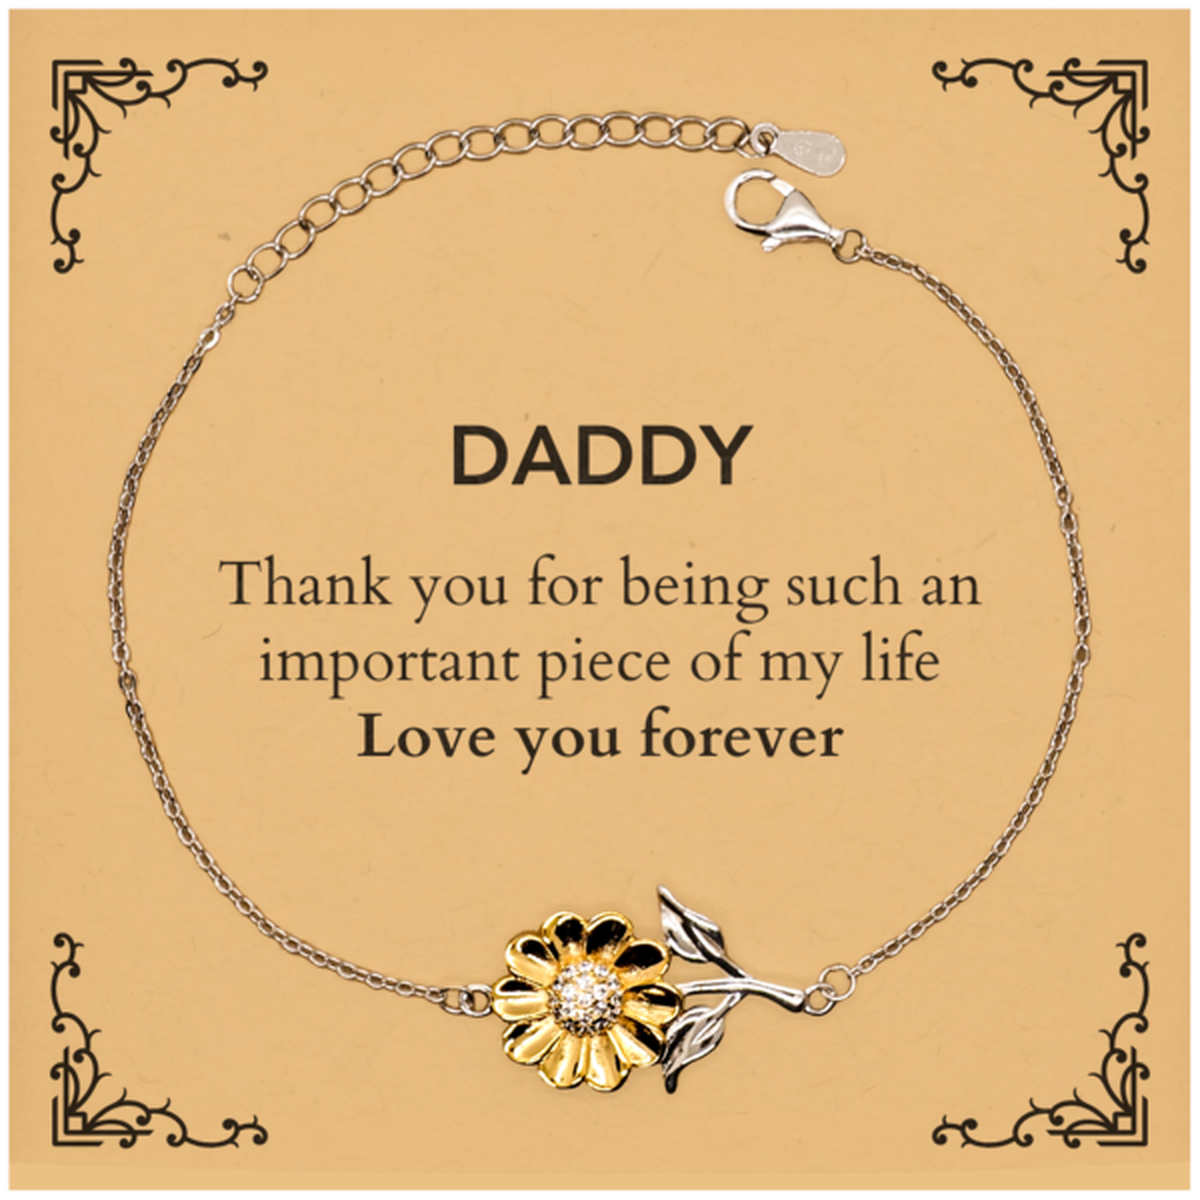 Appropriate Daddy Sunflower Bracelet Epic Birthday Gifts for Daddy Thank you for being such an important piece of my life Daddy Christmas Mothers Fathers Day